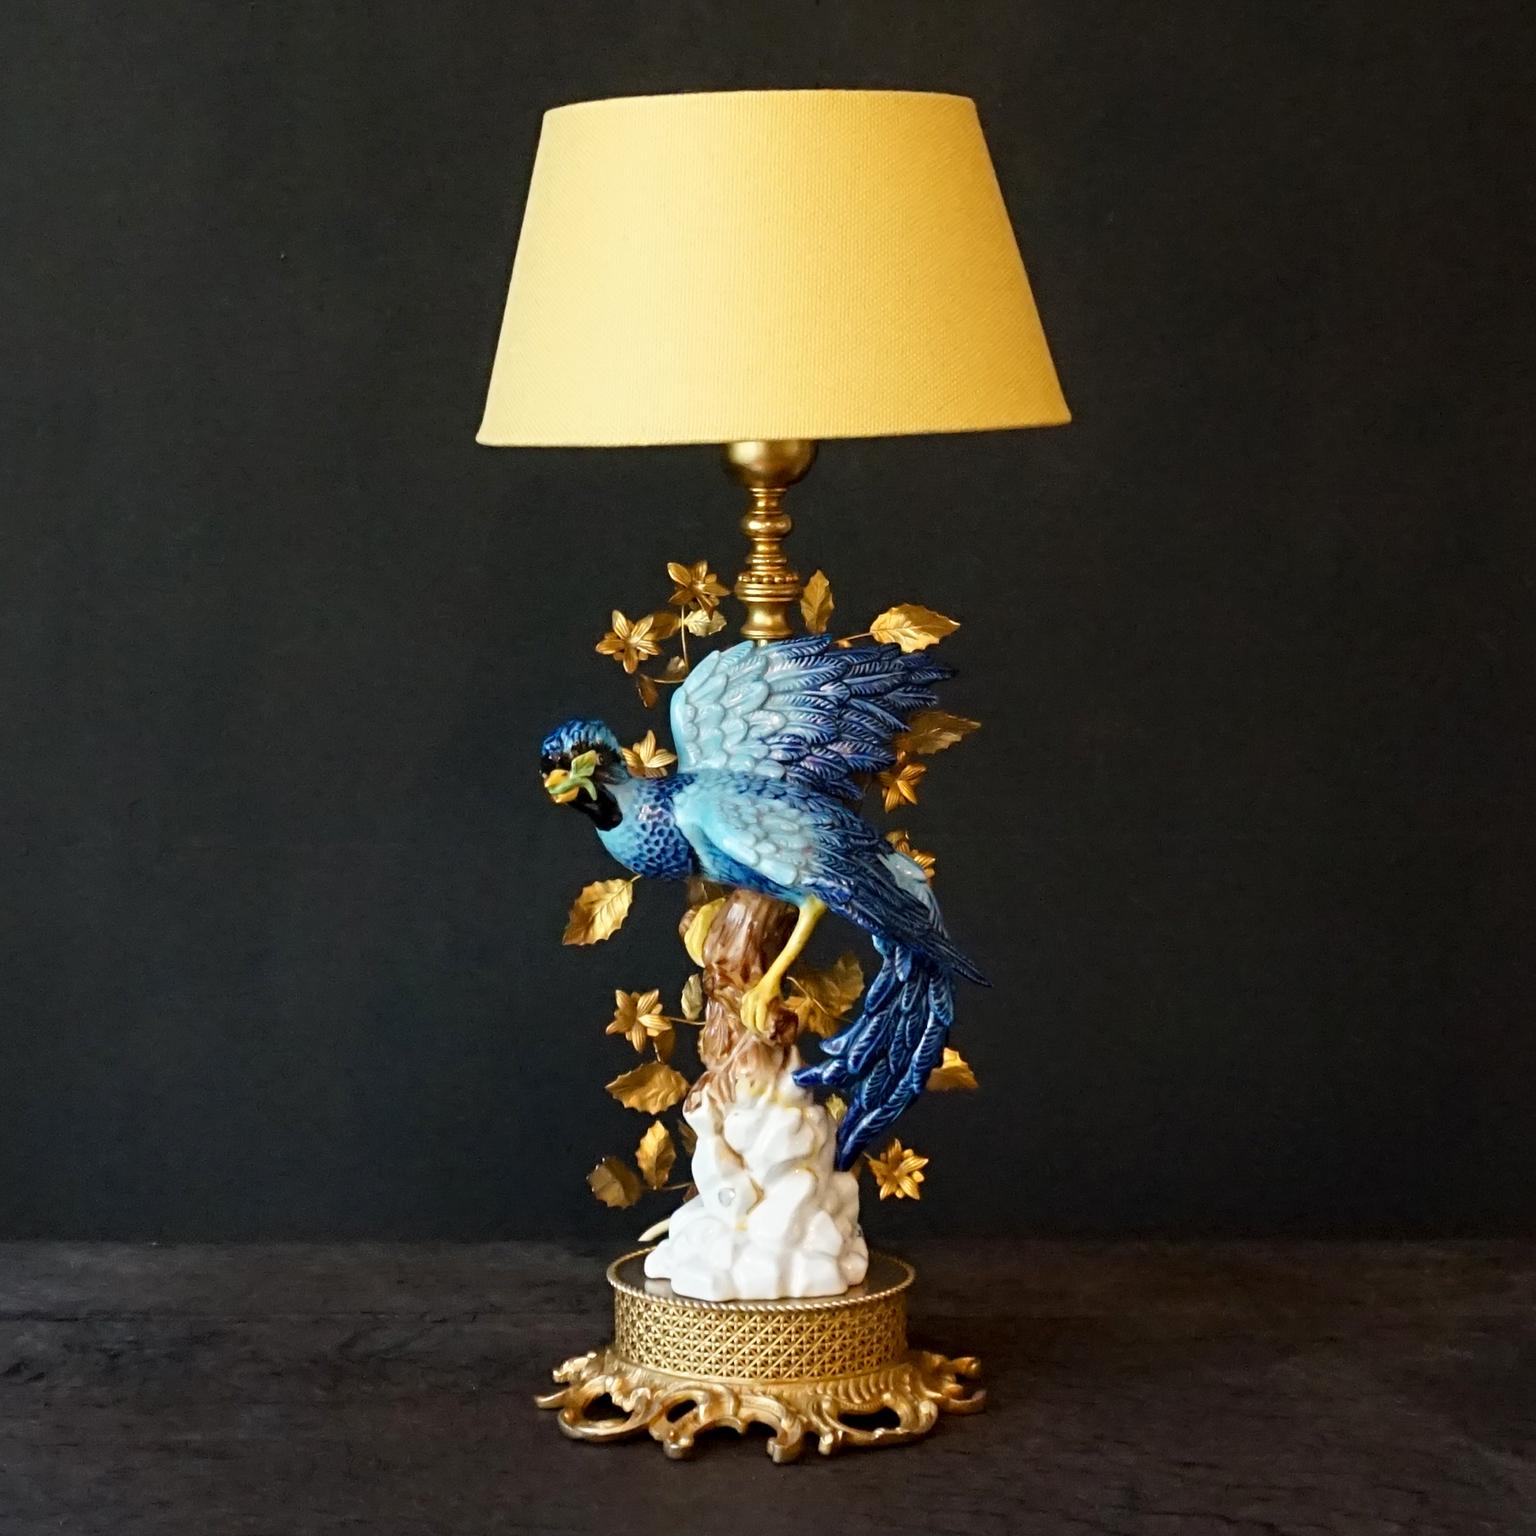 Spectaculair looking table lamp depicting a hand painted porcelain rock base and branch with an eye-catching tropical blue bird on top of it. Ornamented with tole branches and leaves, marked and made by Giulia Mangani, circa 1970.

The bird and